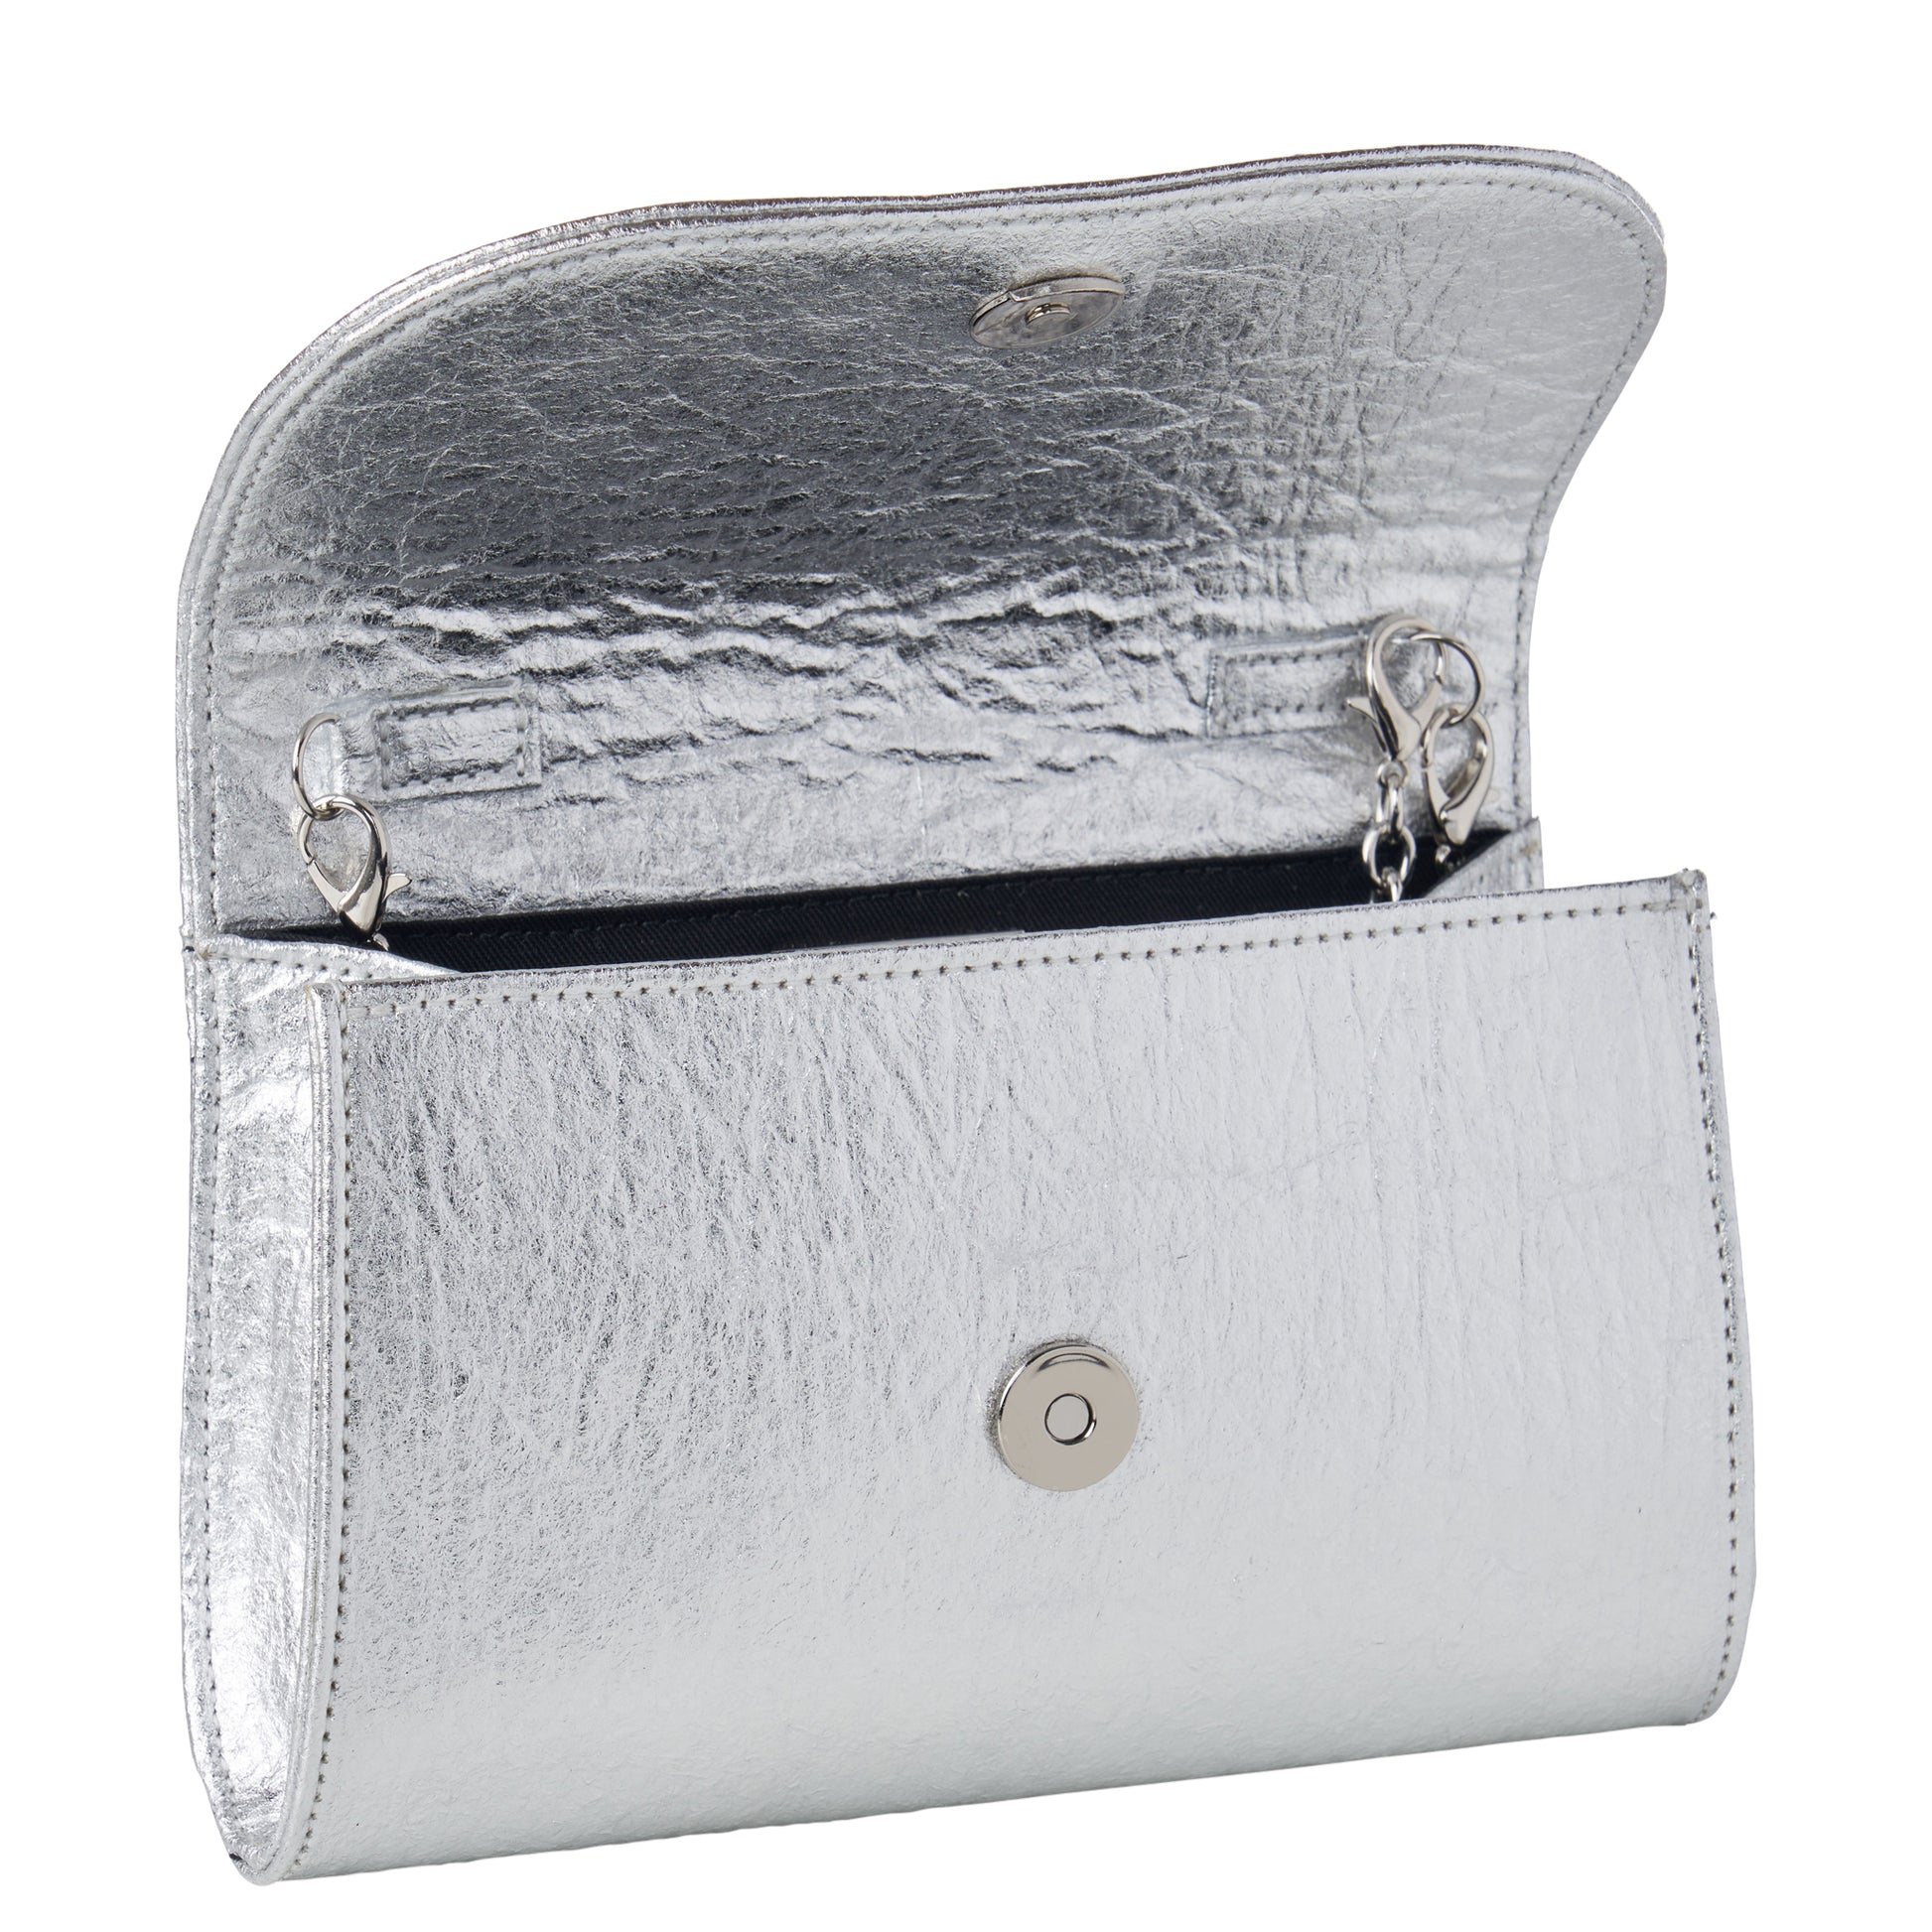 Silver Regula Women's Acrylic Chain Decor Metallic Evening Party Clutch Bag  Wallet - China Replica AAA Distributors and Travel Bag price |  Made-in-China.com